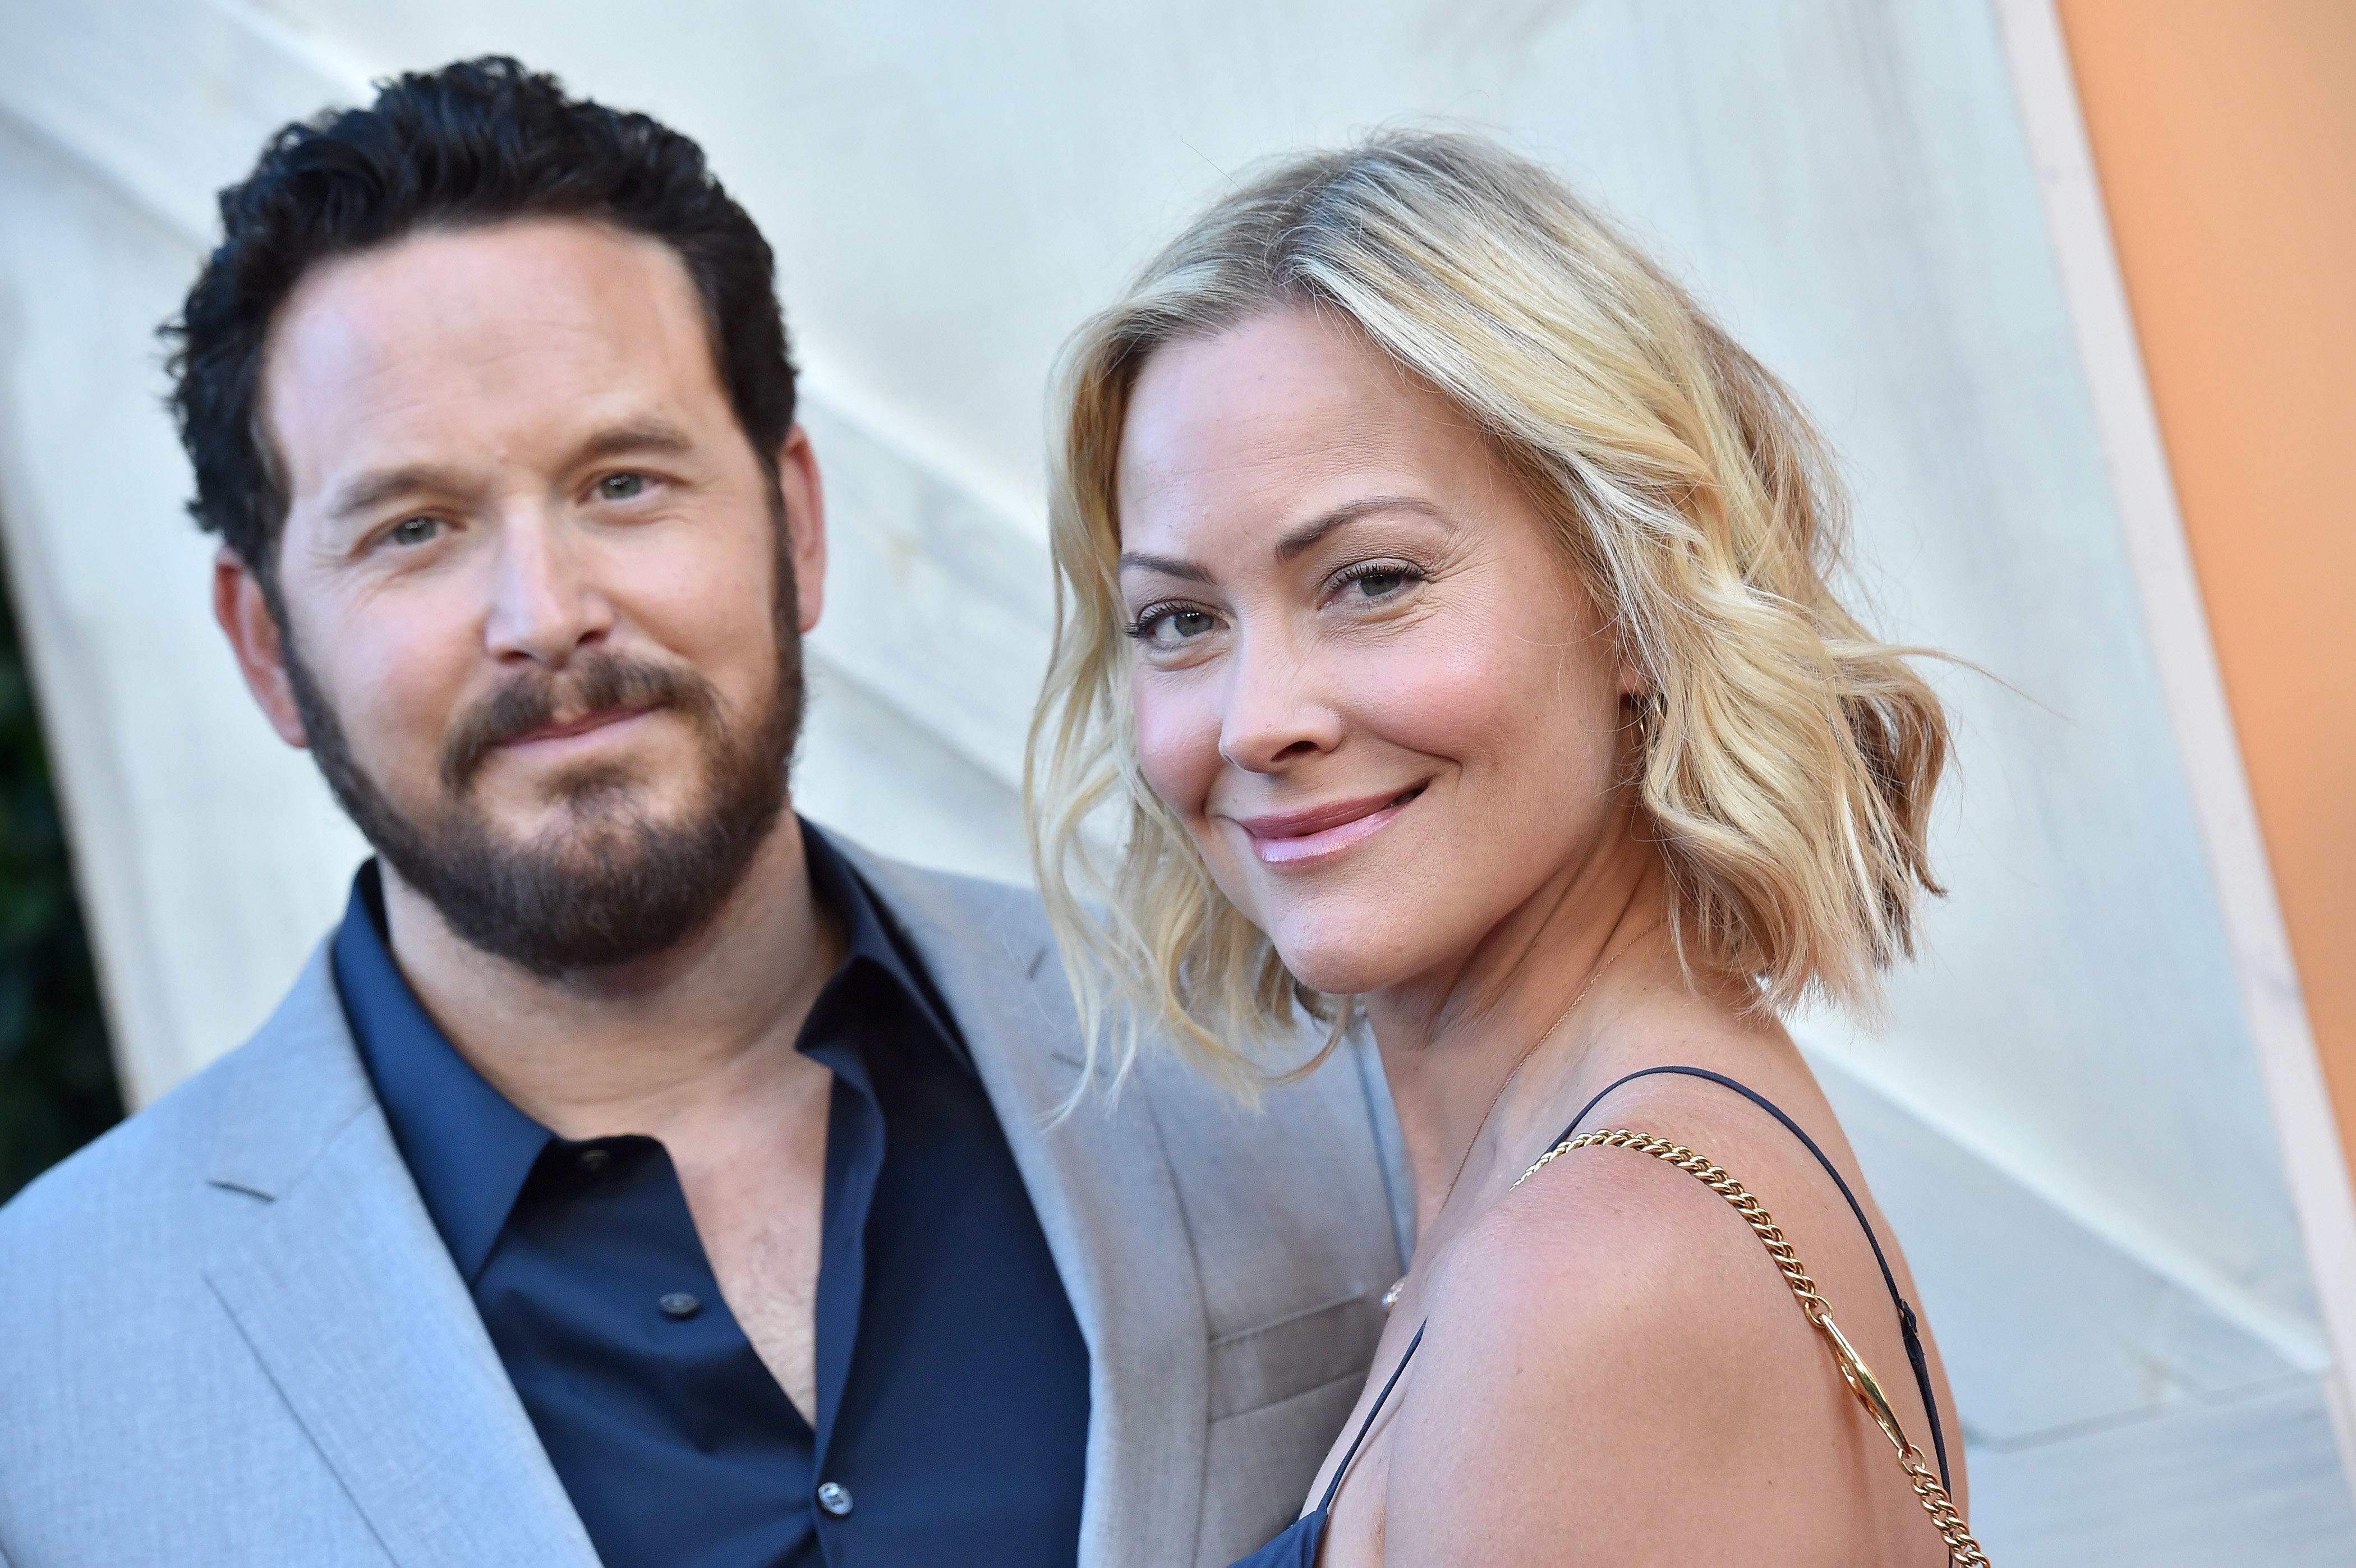 Actor Cole Hauser and his wife former actress Cynthia Daniel attend the premiere party for Paramount Network's "Yellowstone" Season 2 at Lombardi House on May 30, 2019 in Los Angeles, California | Source: Getty Images